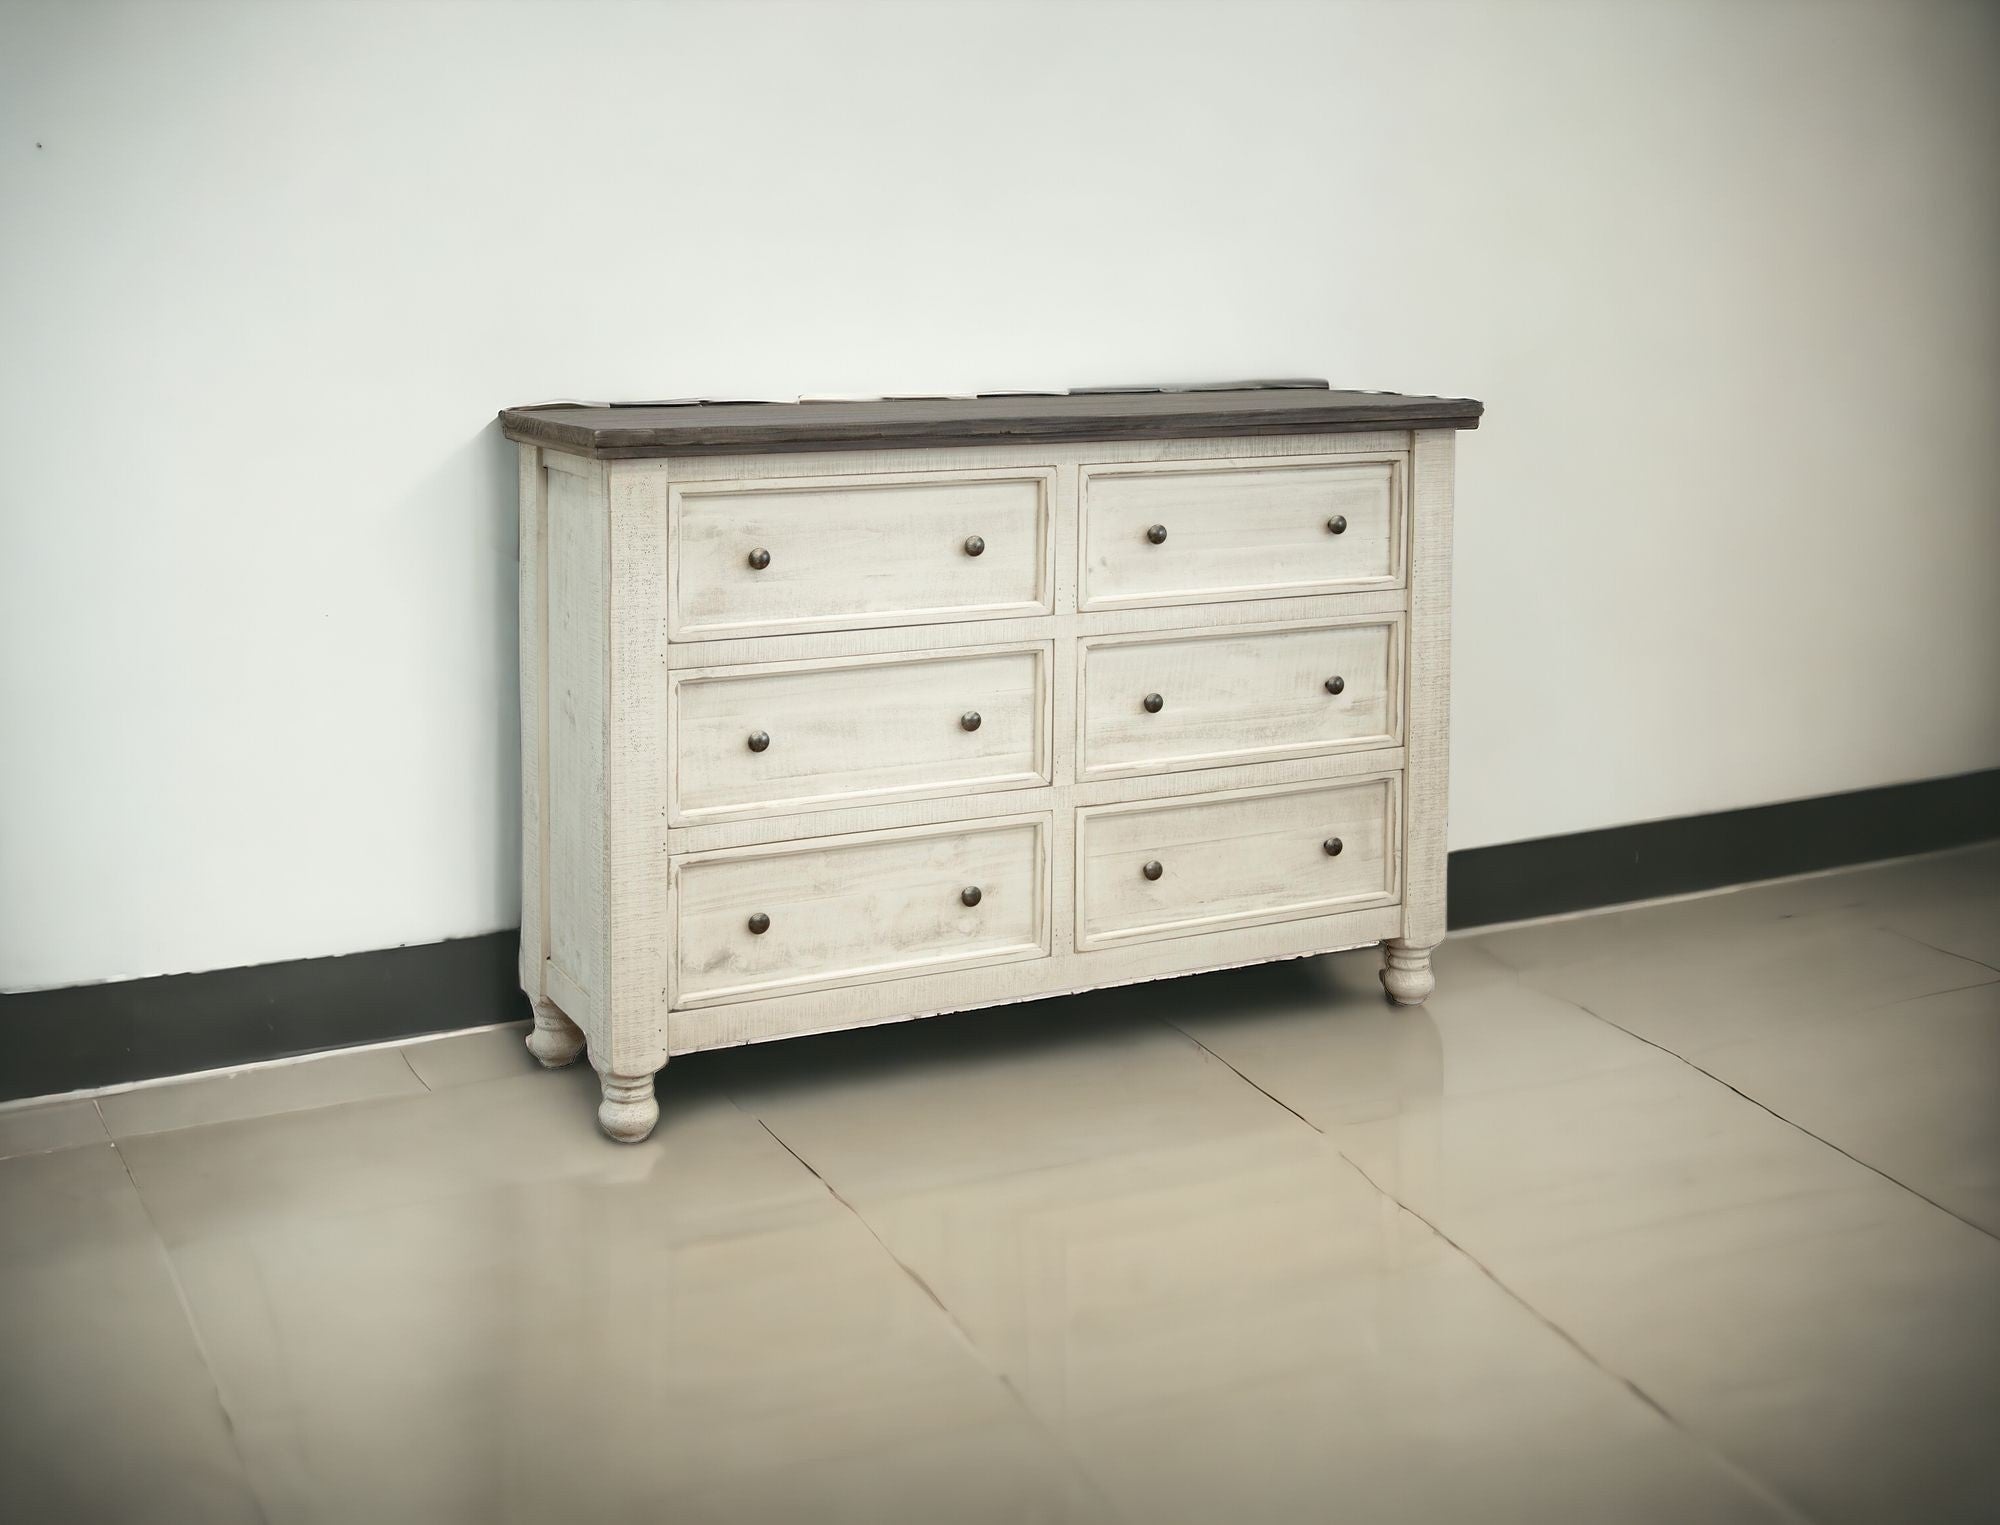 62" Gray and Ivory Solid Wood Six Drawer Double Dresser